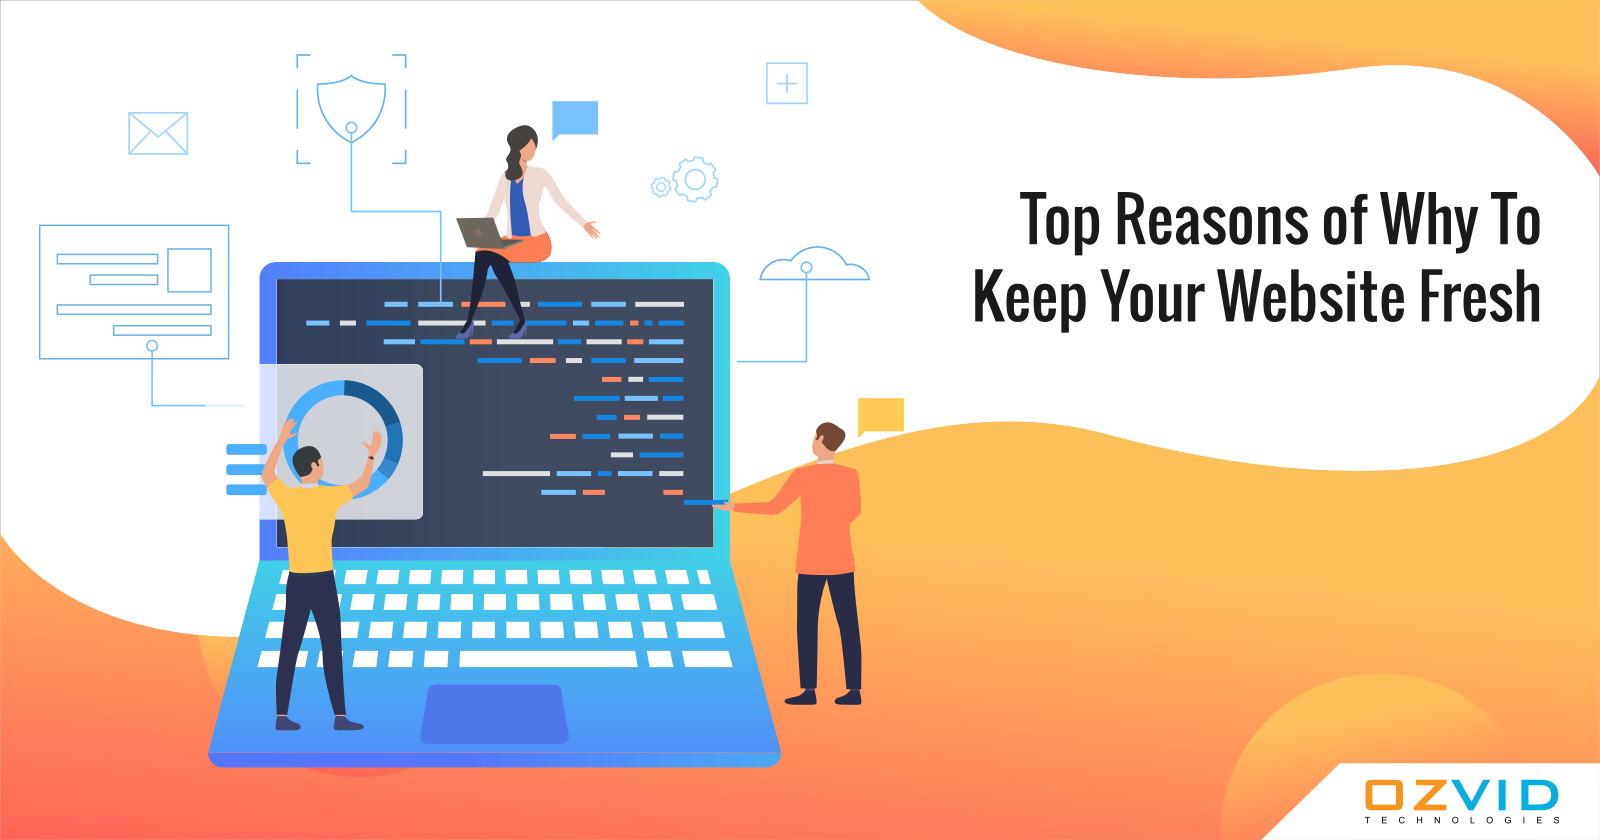 Top Reasons of Why To Keep Your Website Fresh